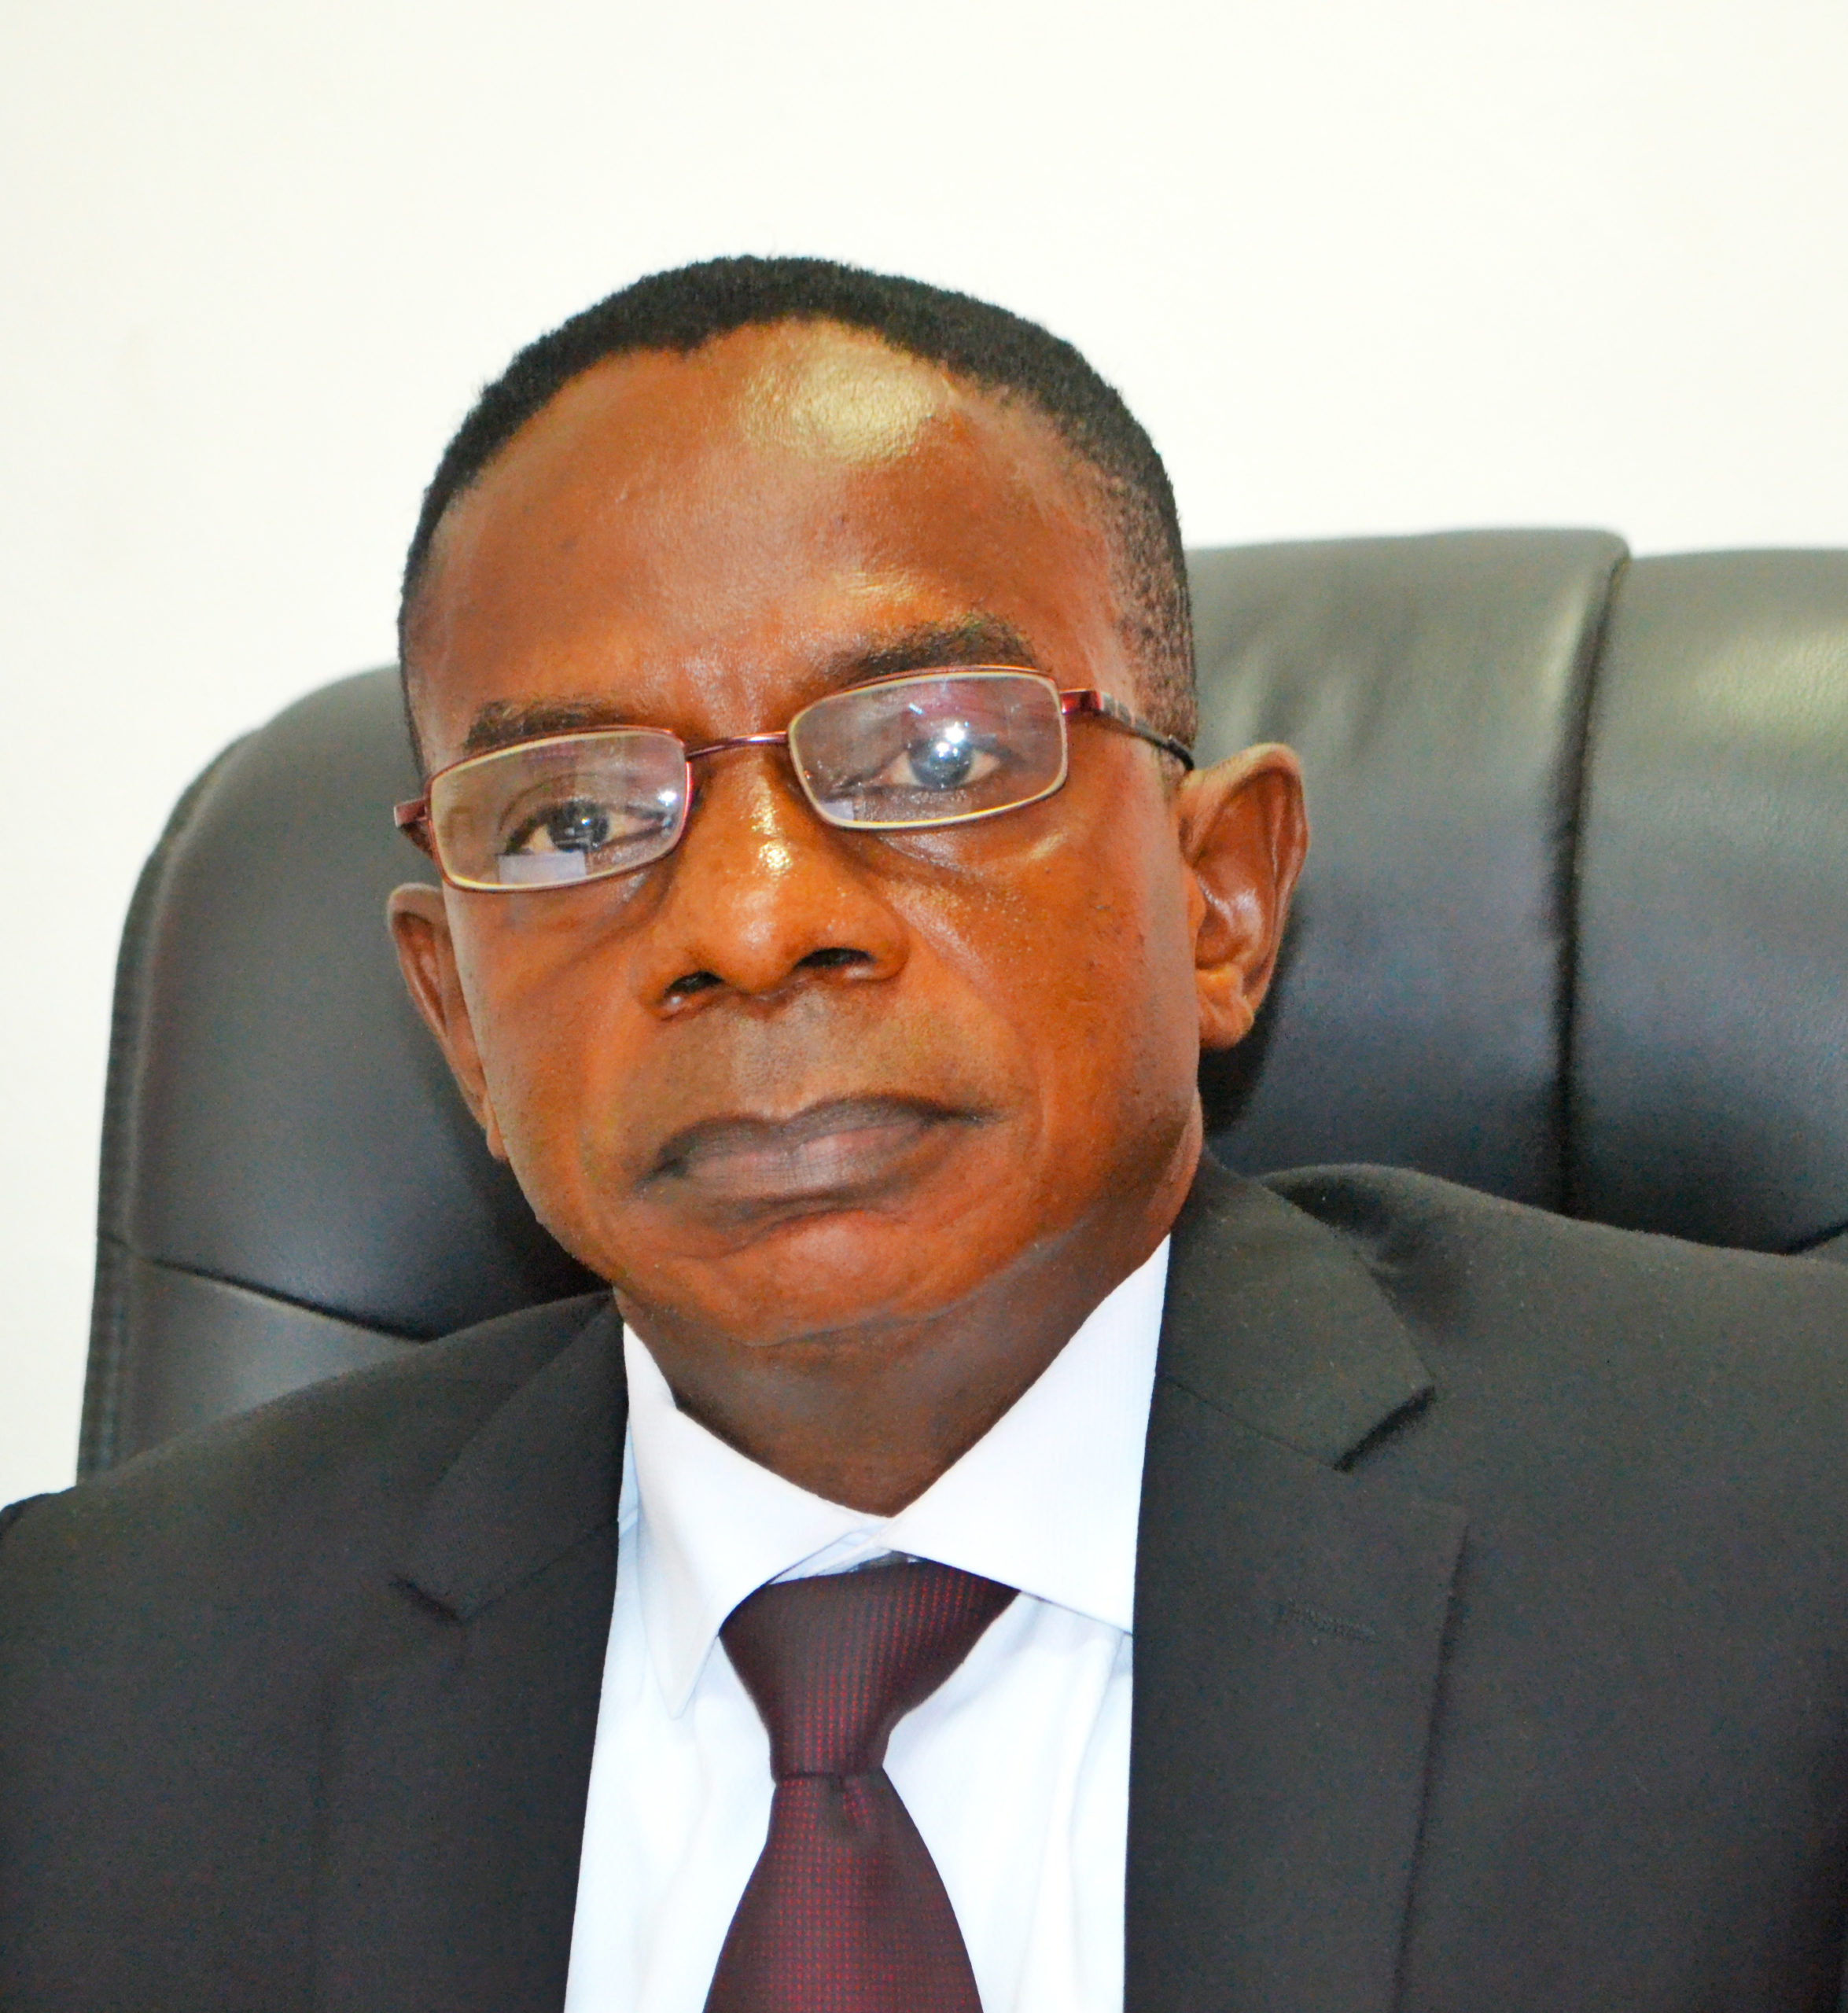 Auditor-General: GH₵95m Assemblies Common Fund cash used to build private entity